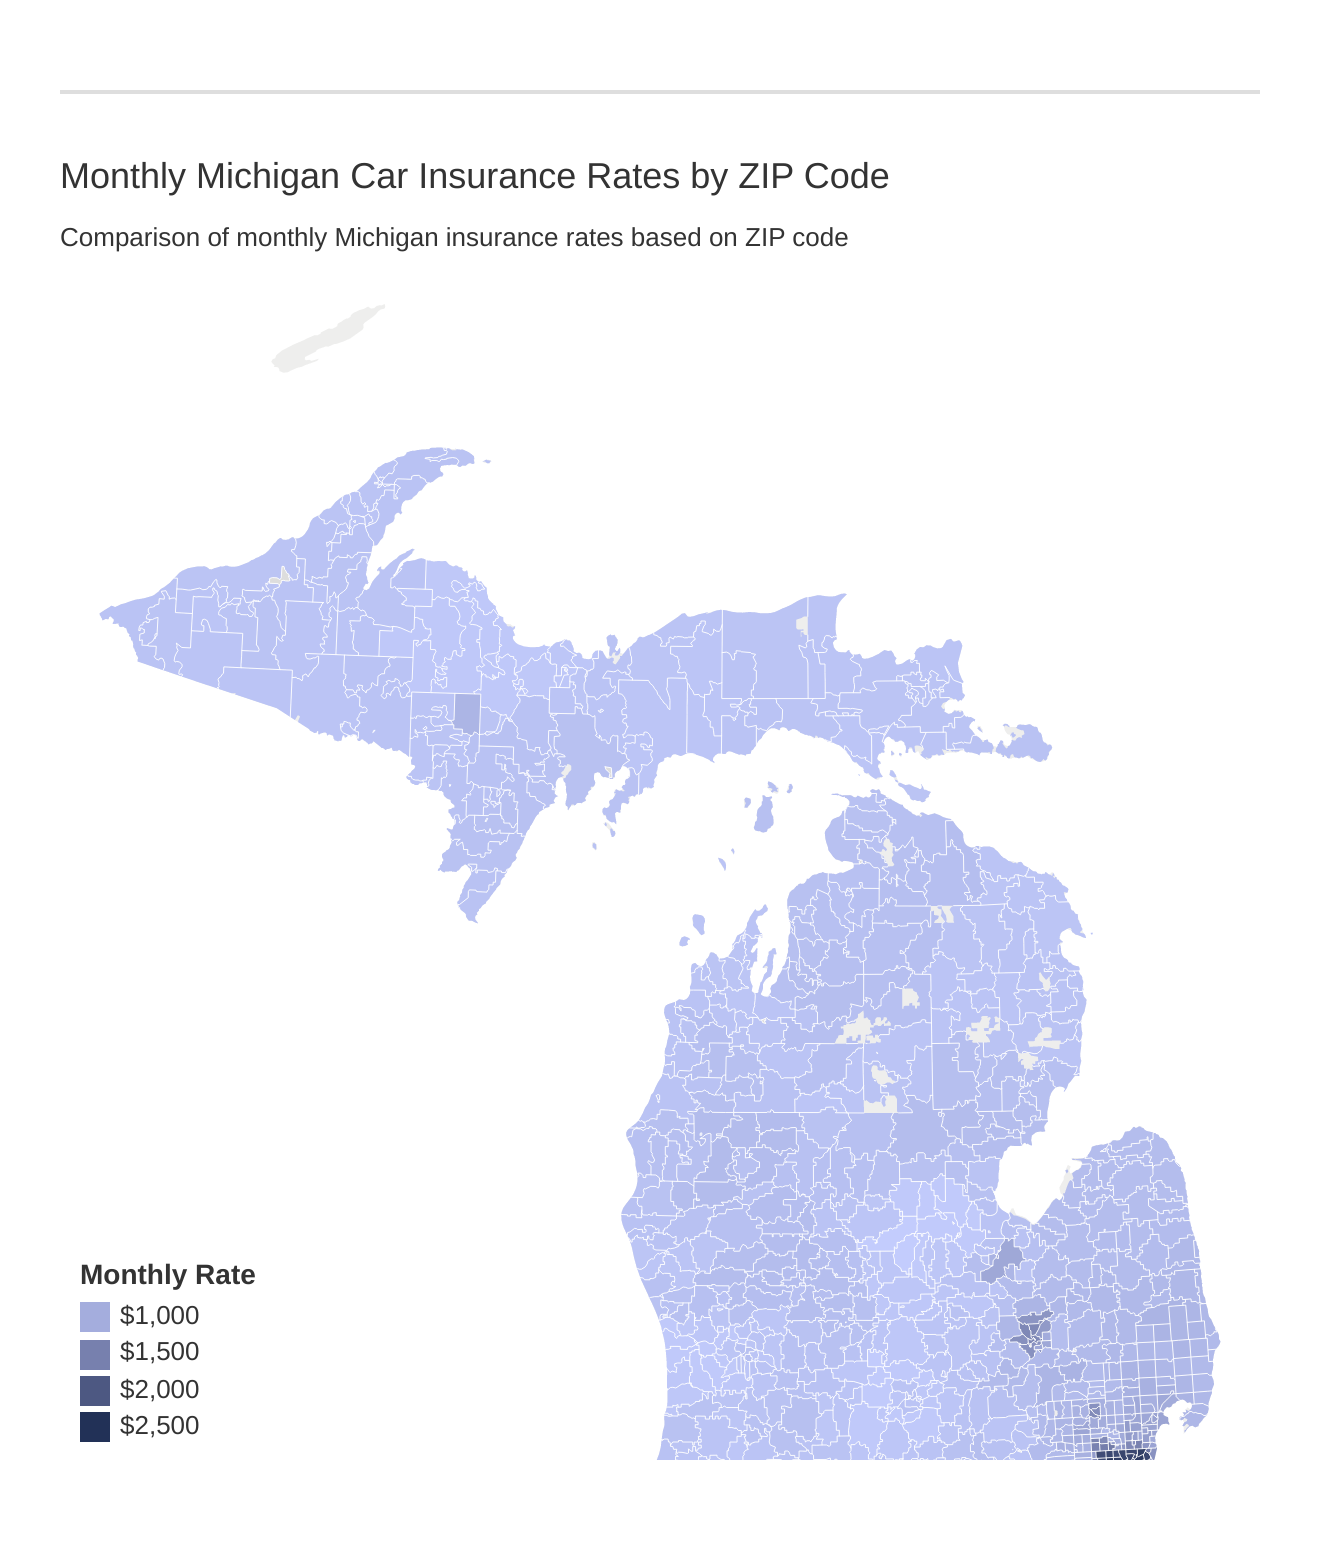 Monthly Michigan Car Insurance Rates by ZIP Code